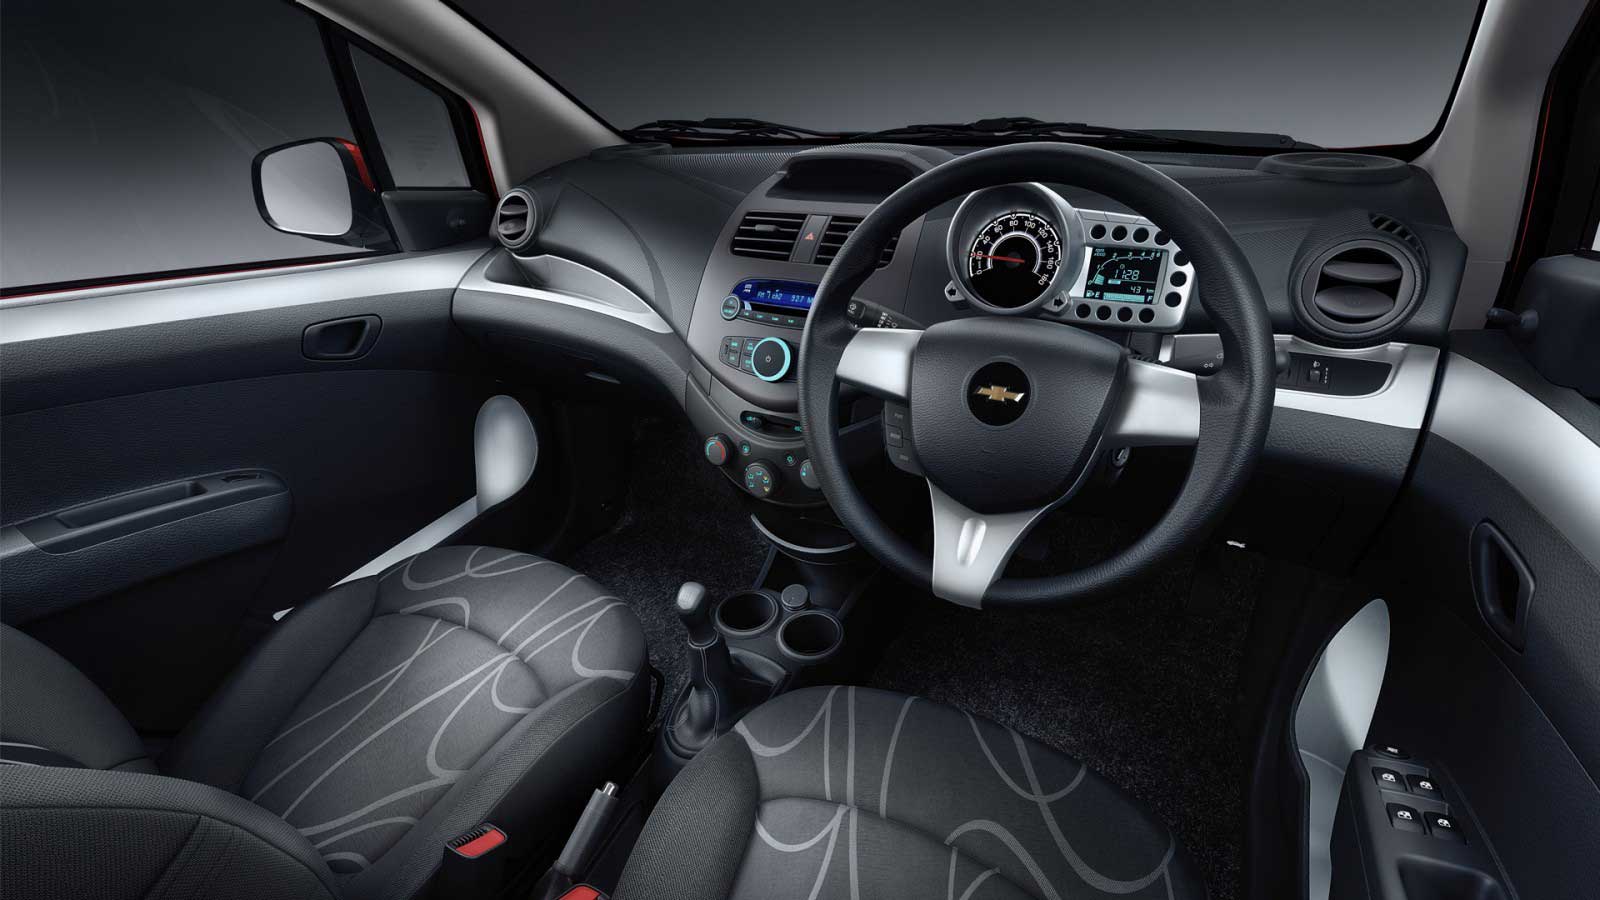 Chevrolet Beat PS Petrol Interior front view